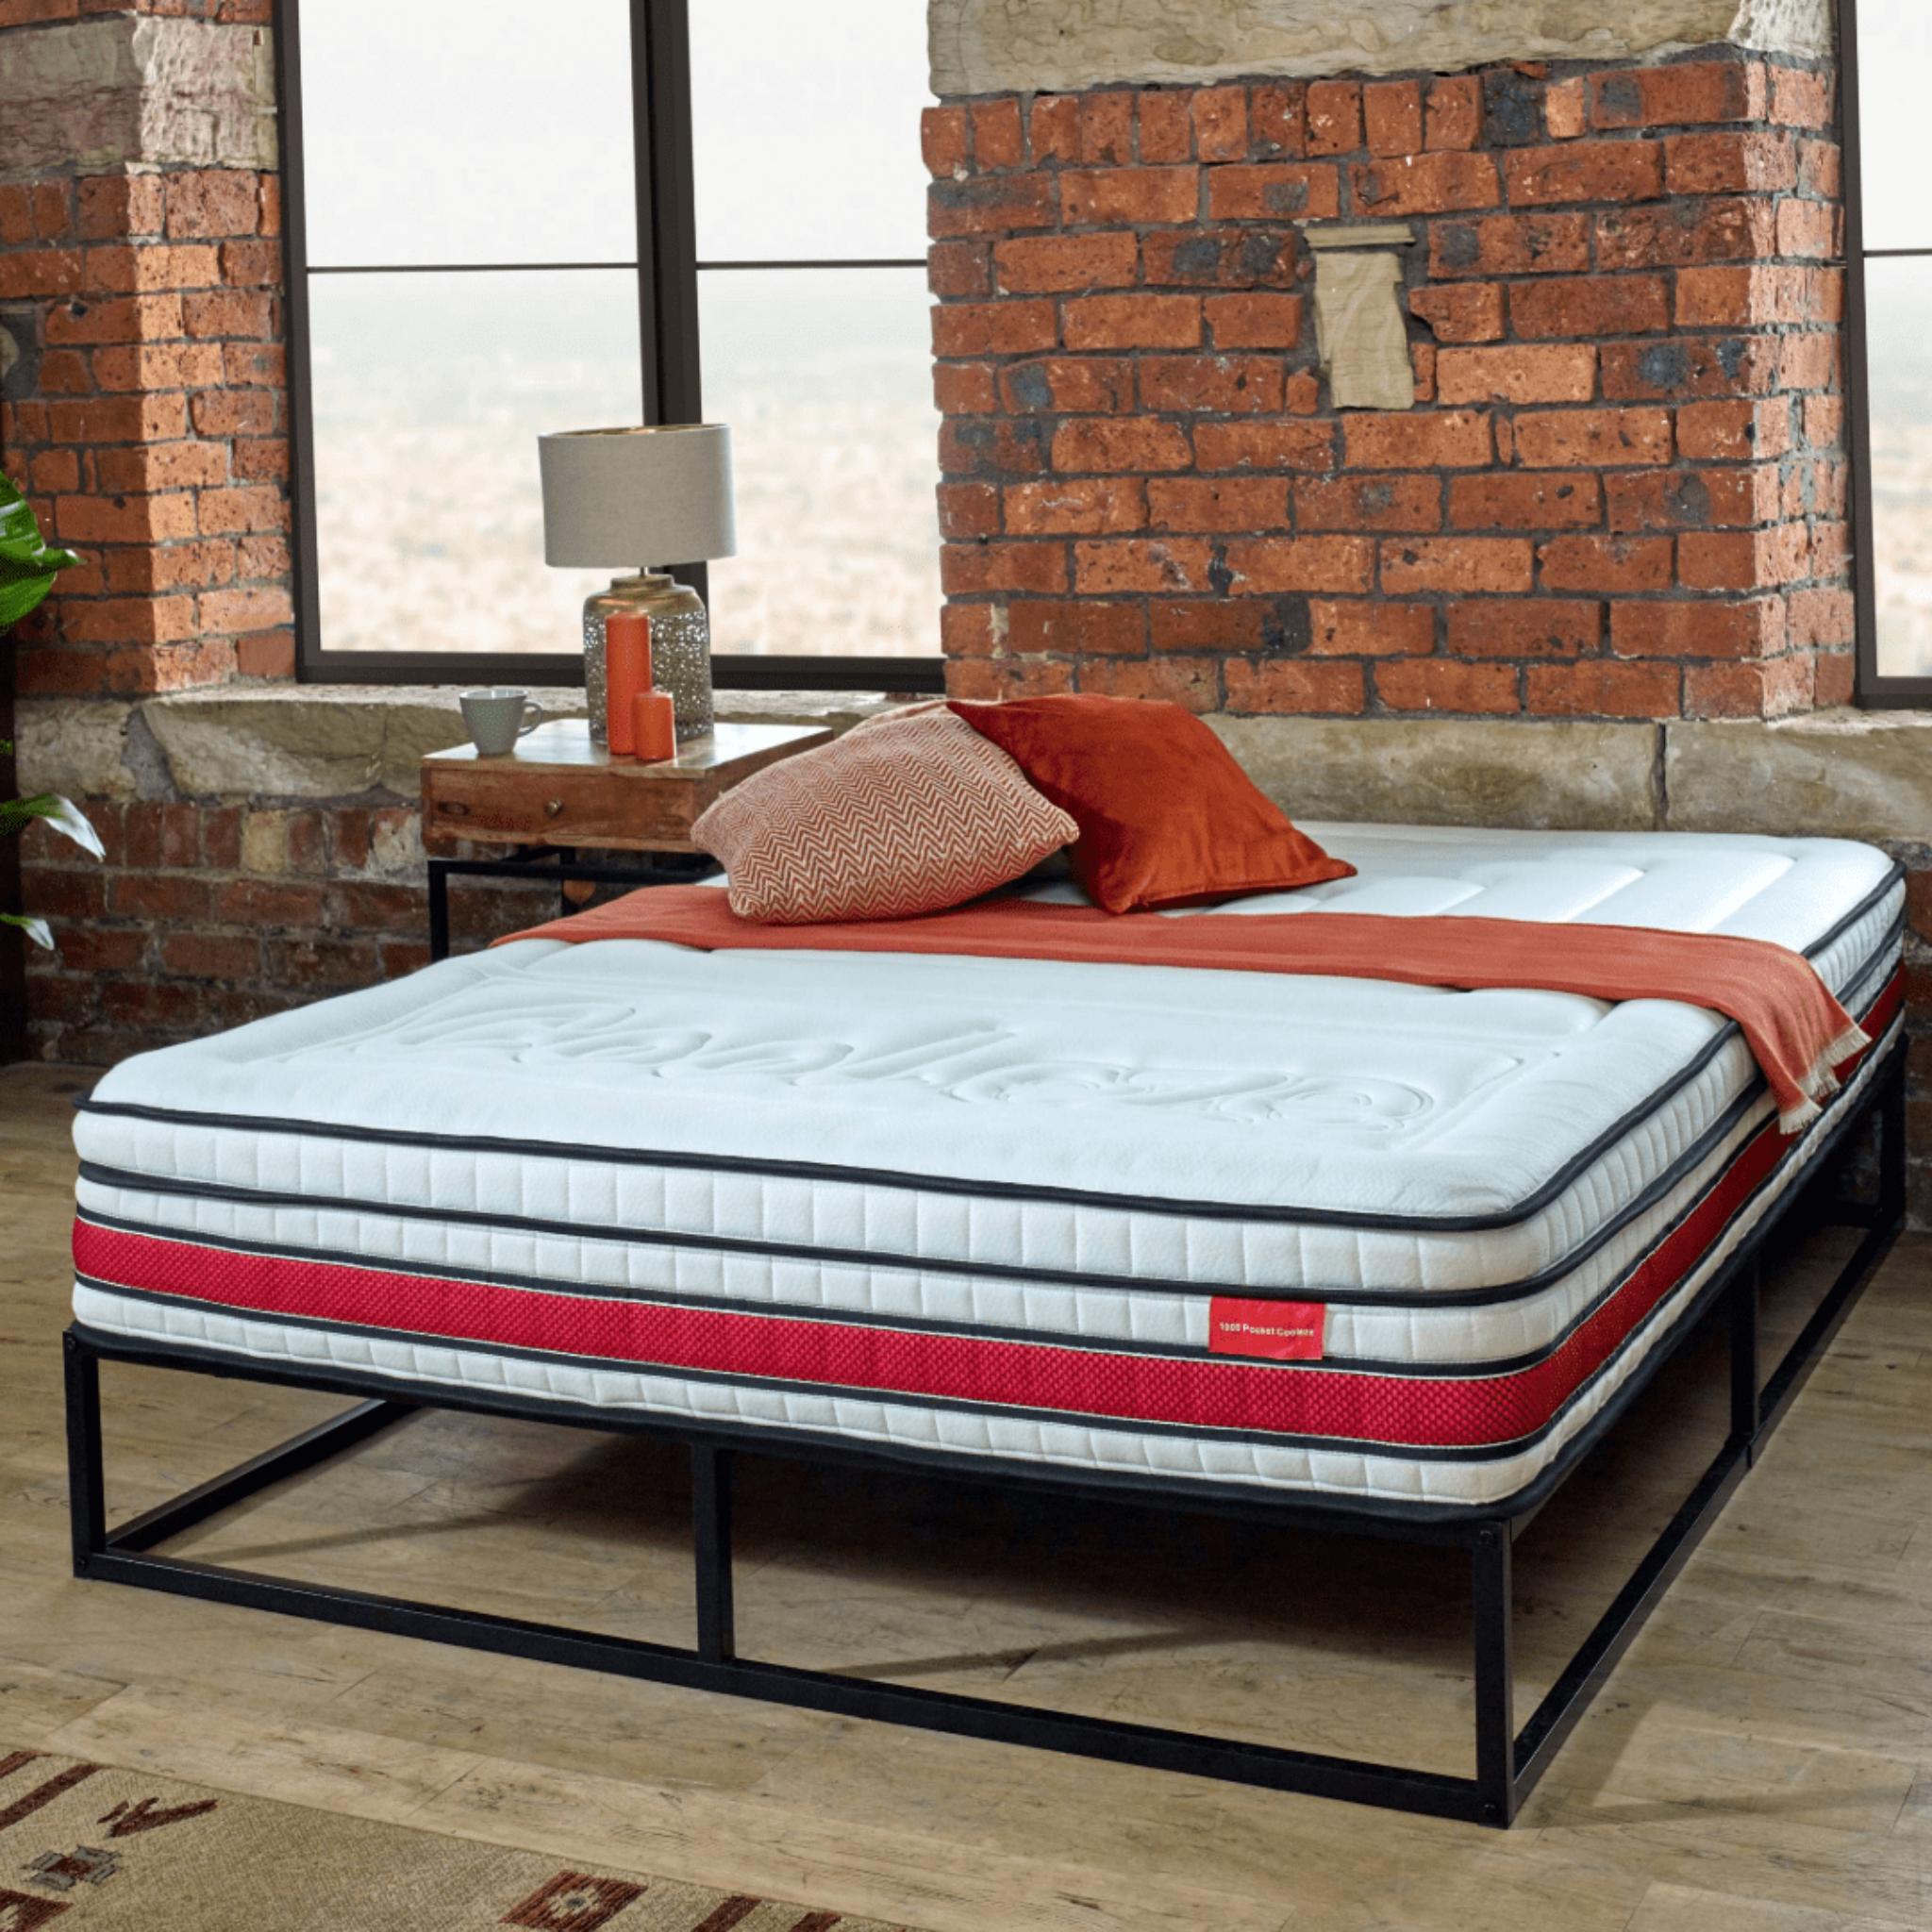 COOLEZE_HYBRID_DELUXE_MATTRESS_STYLED_LIFESTYLE_IMAGE